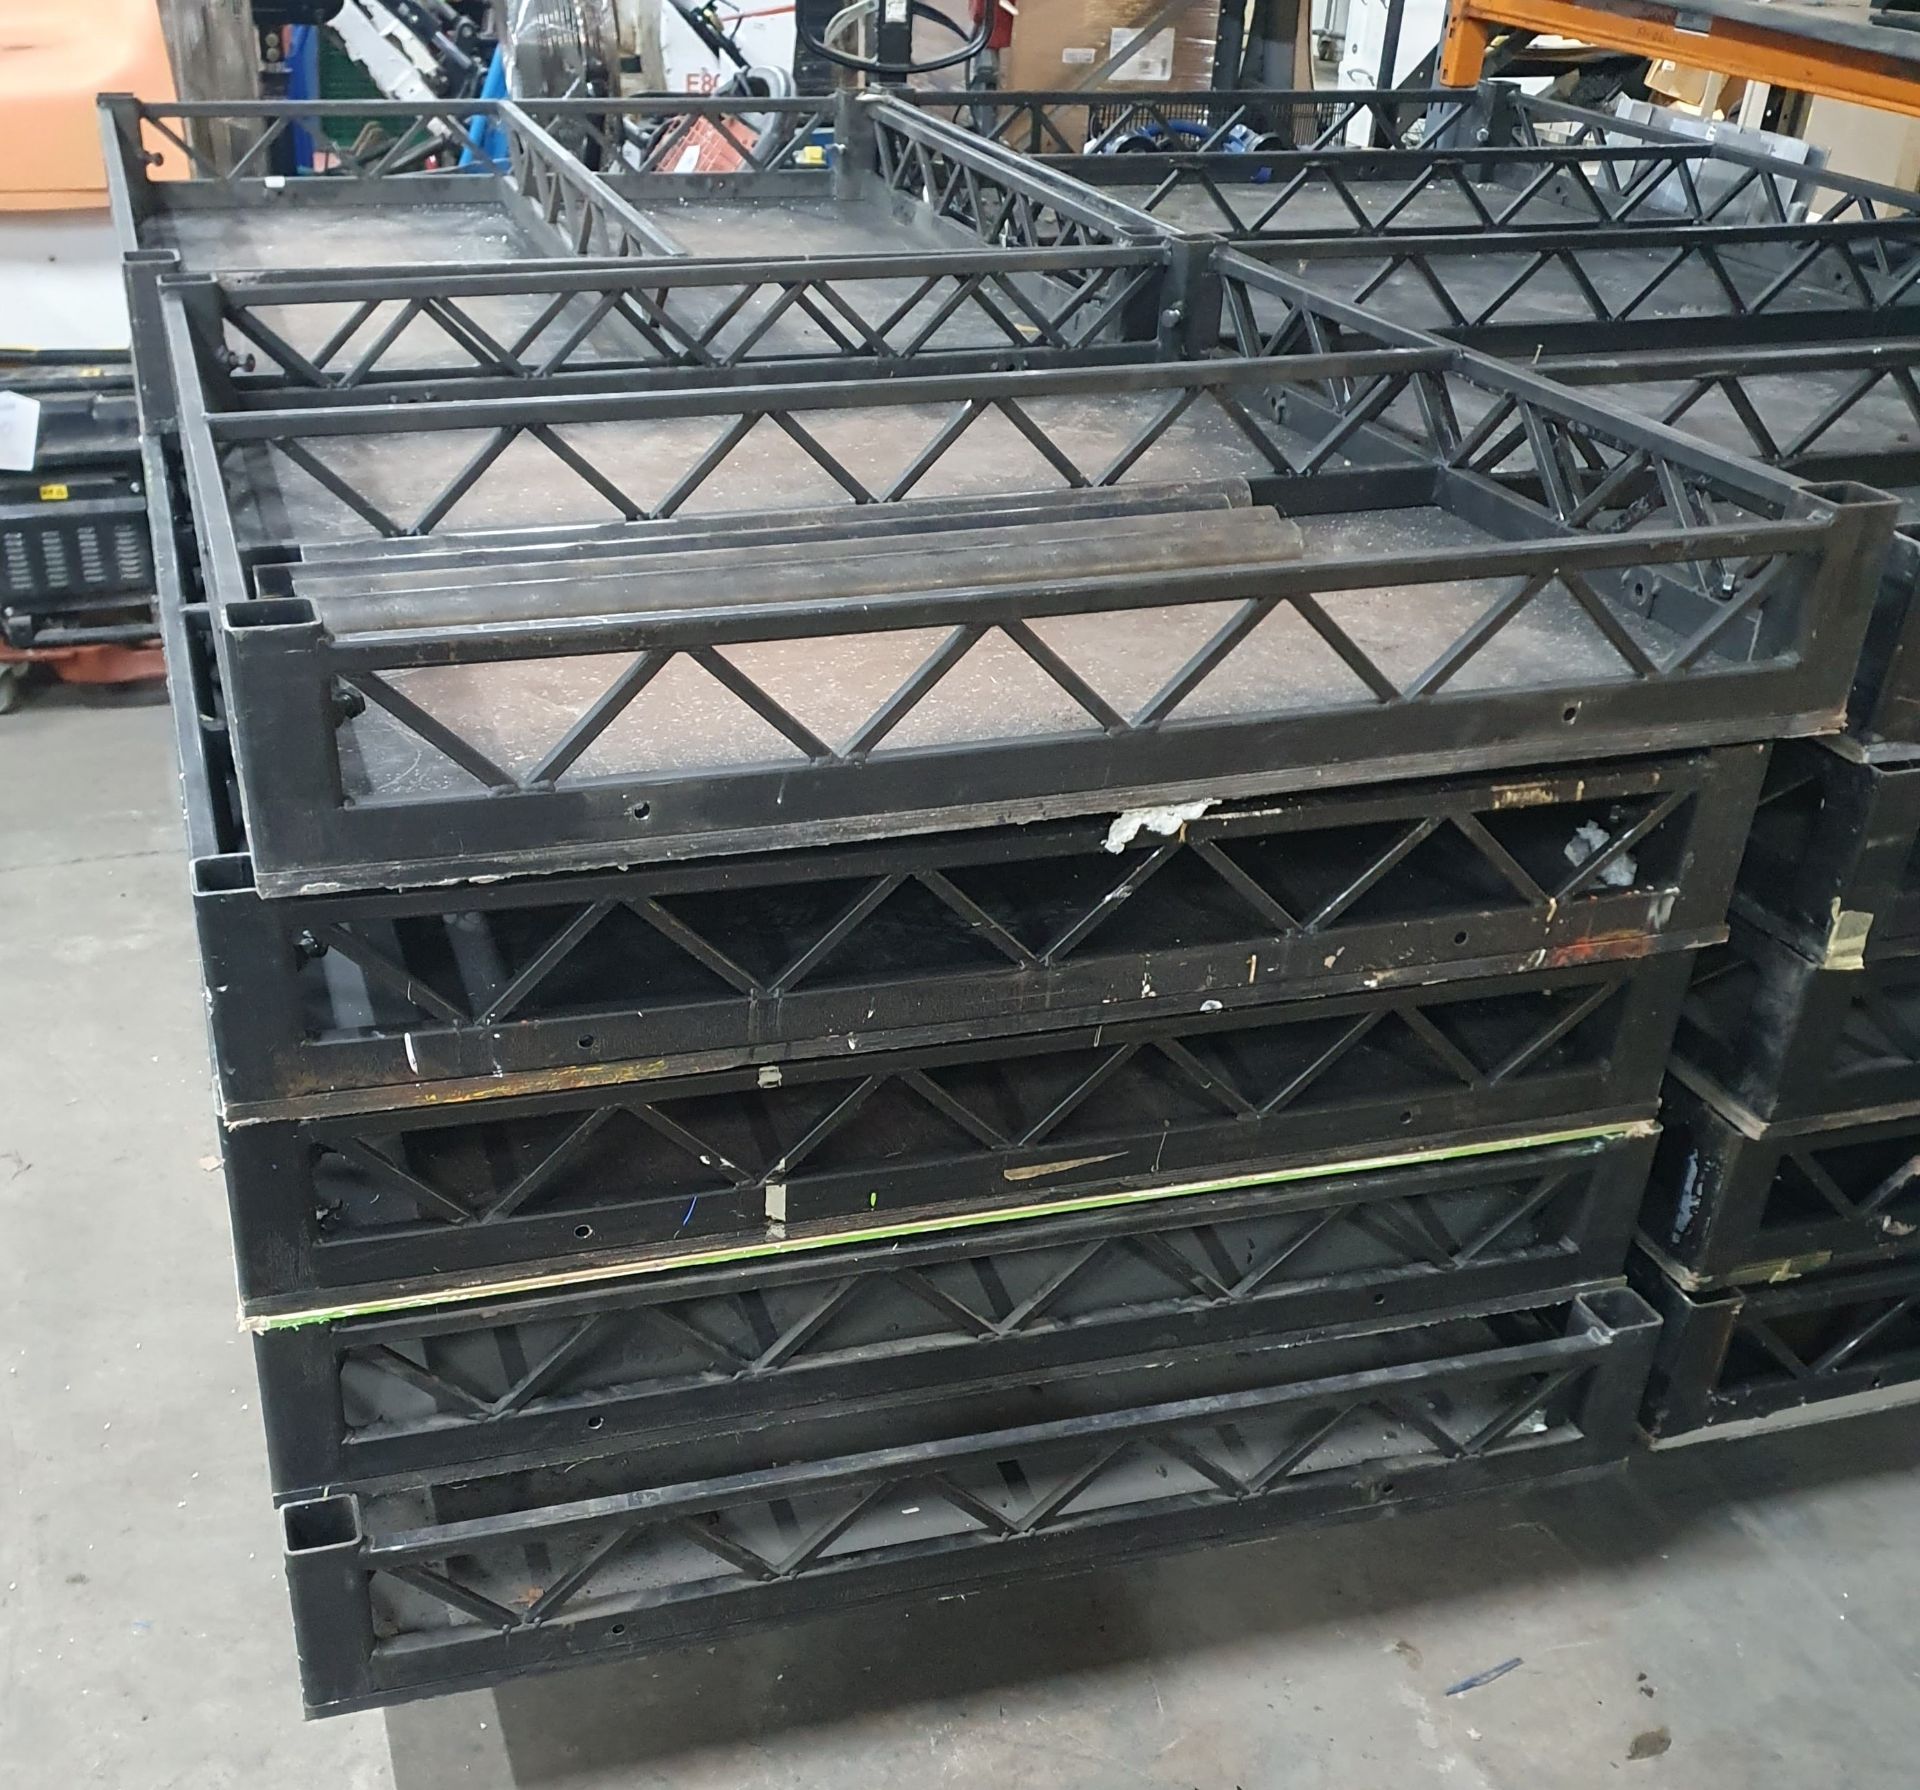 11 x Various Stage Platforms - Stage legs not included - Image 2 of 7